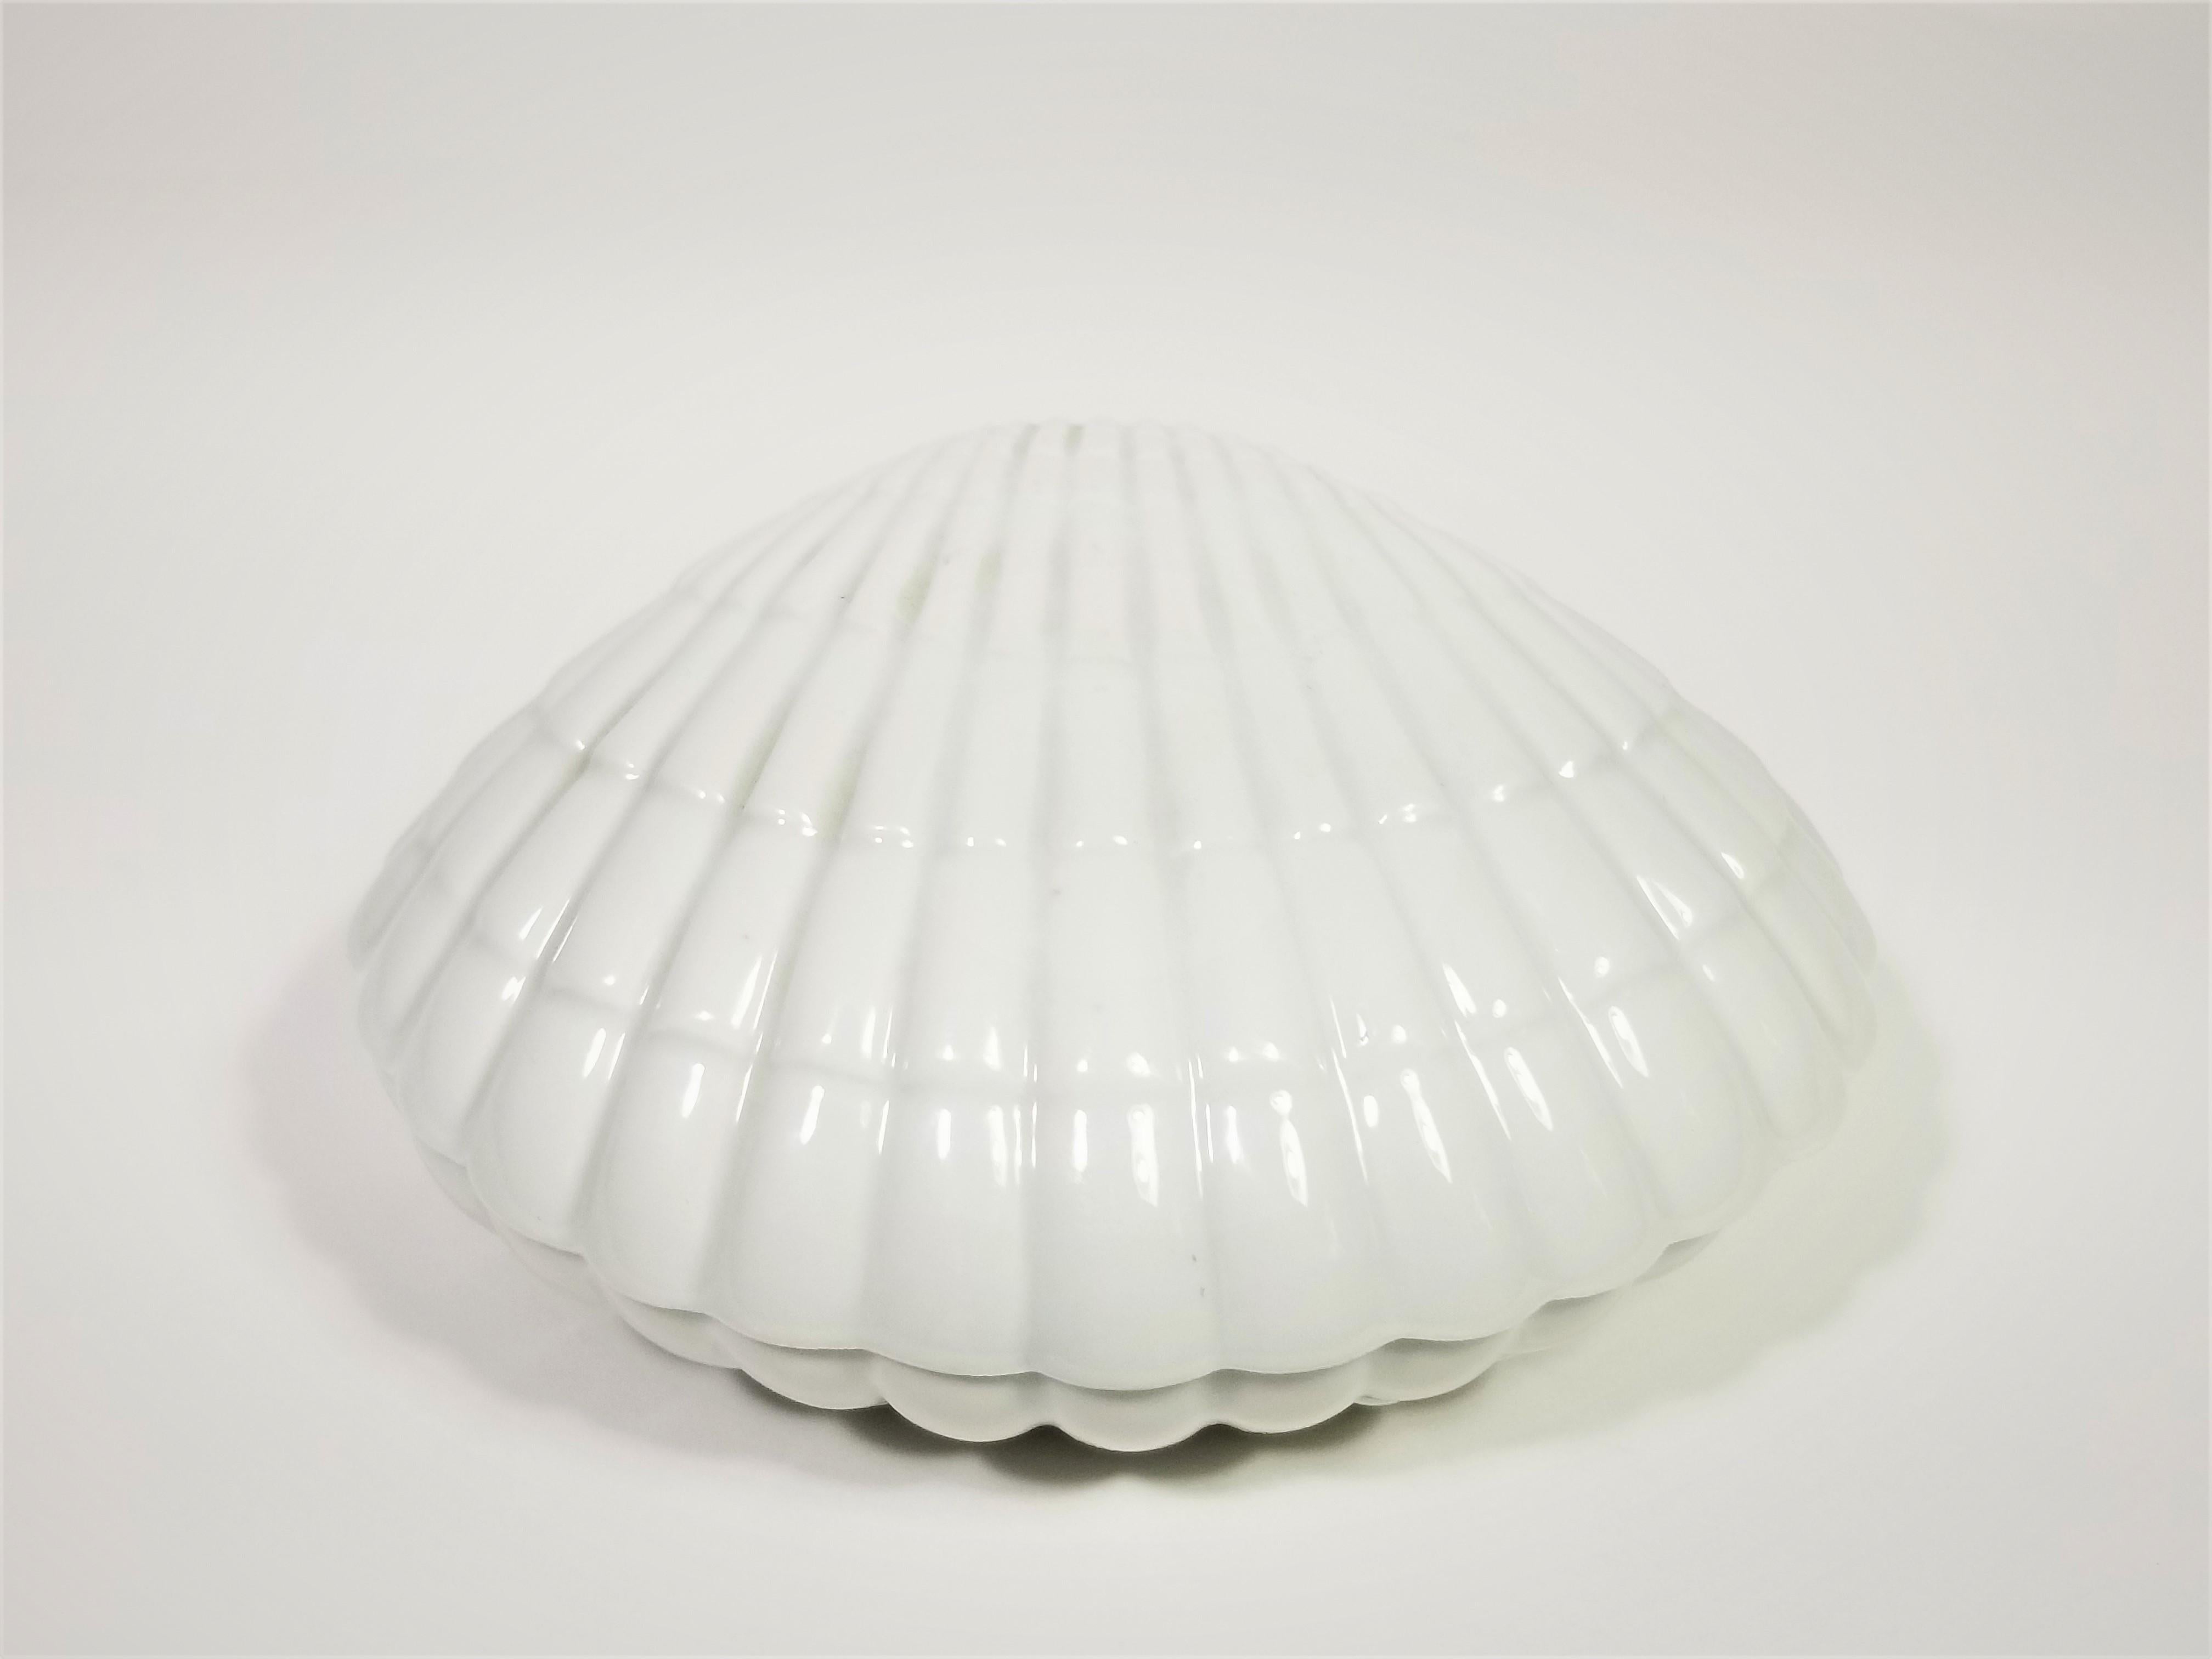 French midcentury decorative white porcelain ceramic clam or shell for vanity, trinkets or decorative
Marked France.